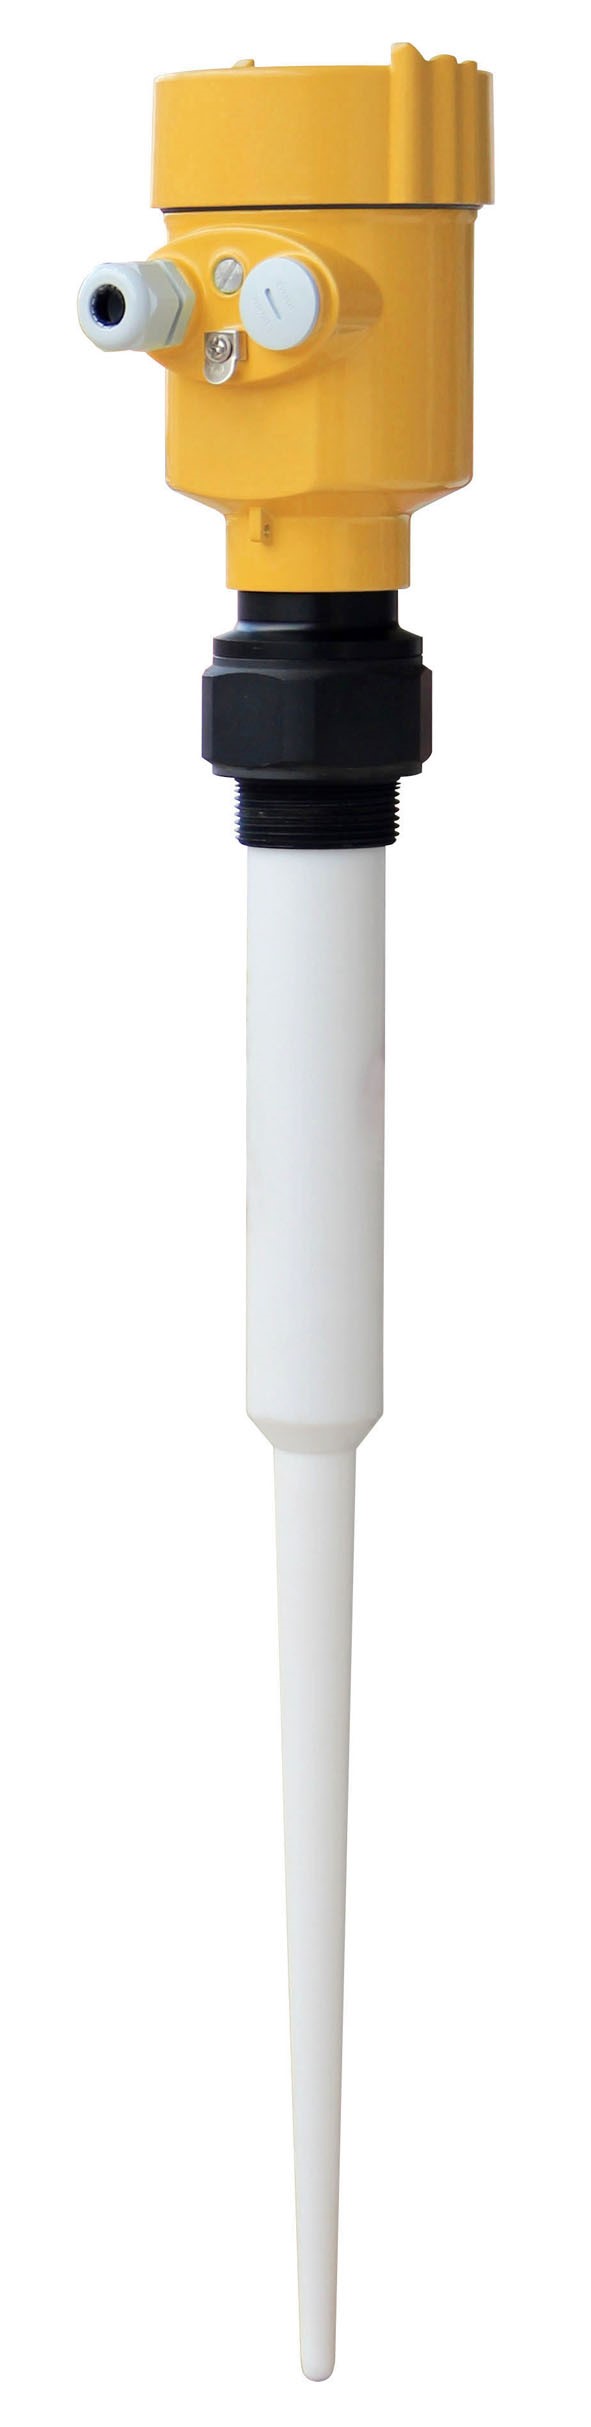 KAIDI high-quality guided wave radar level transmitter principle of operation suppliers for work-3